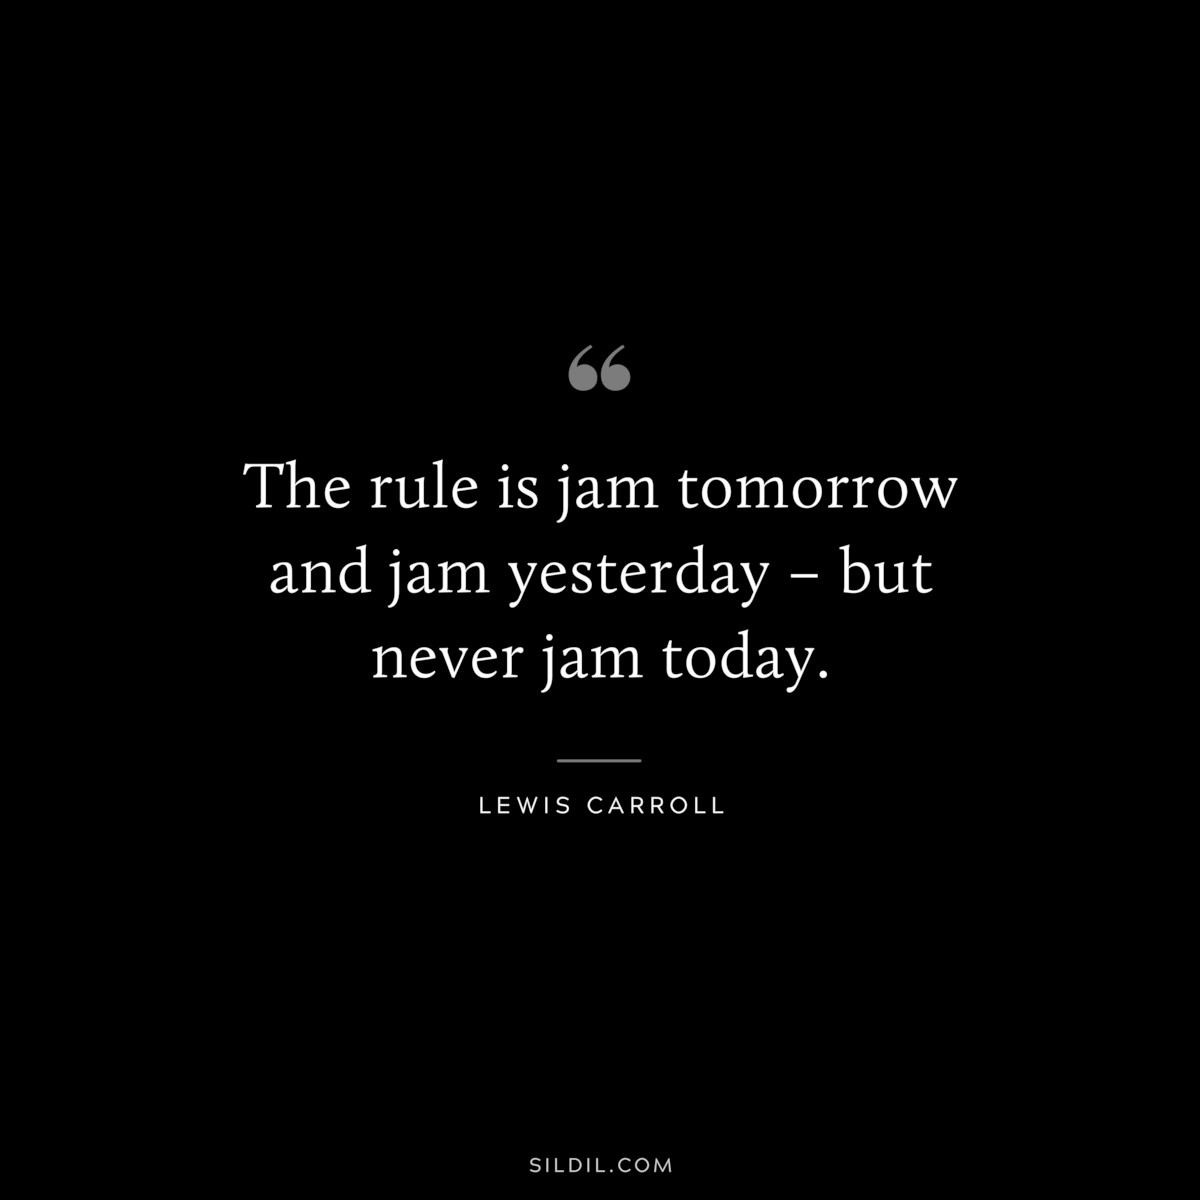 The rule is jam tomorrow and jam yesterday – but never jam today.